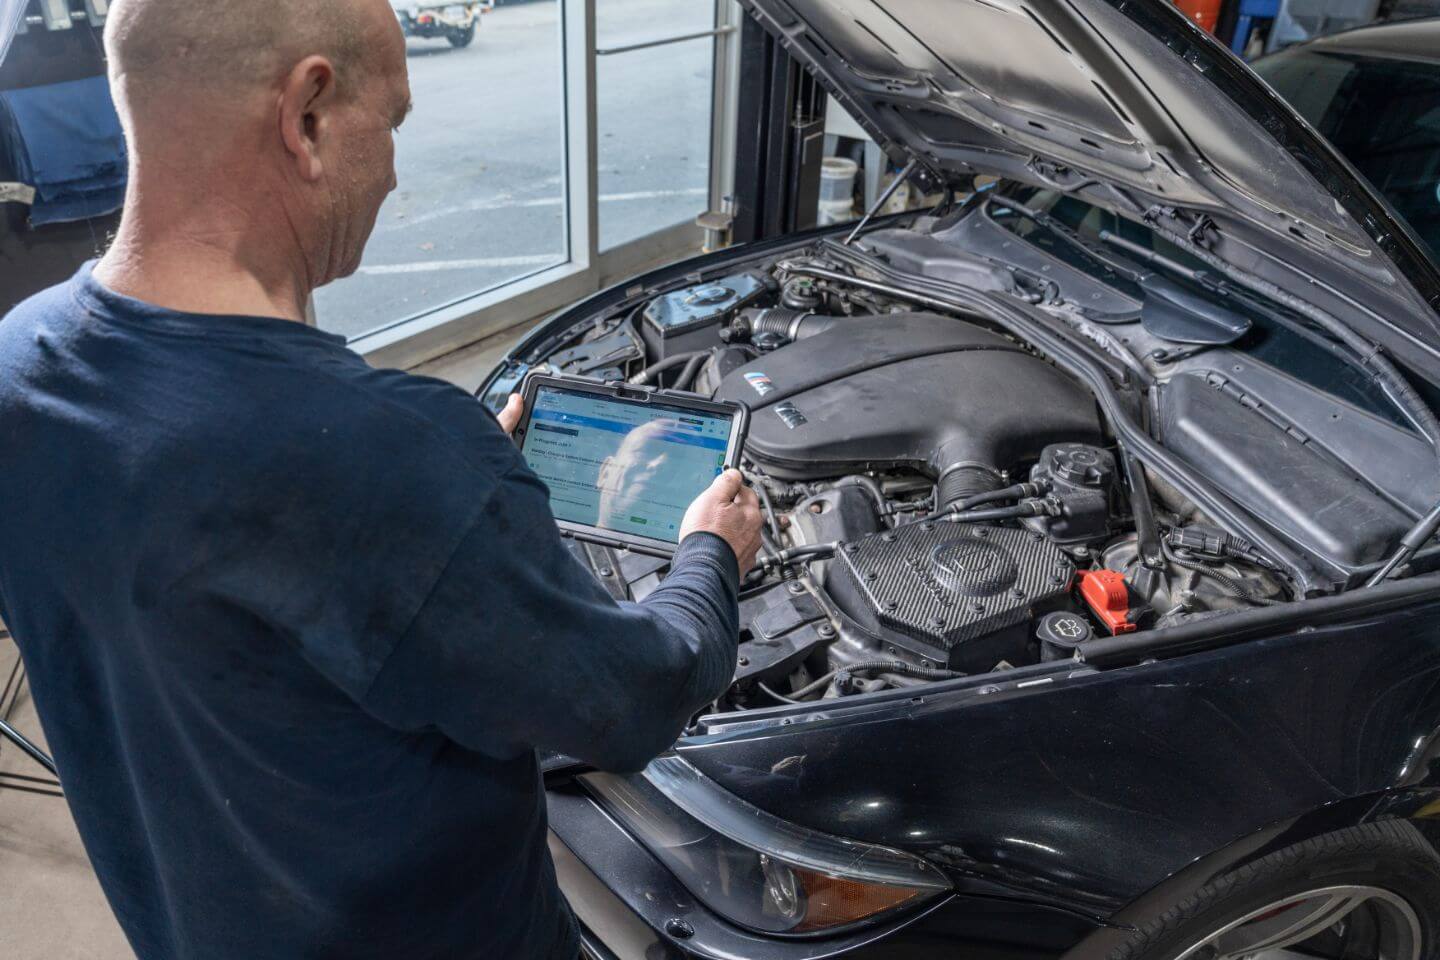 Motor Vehicle Inspections In Markham, ON